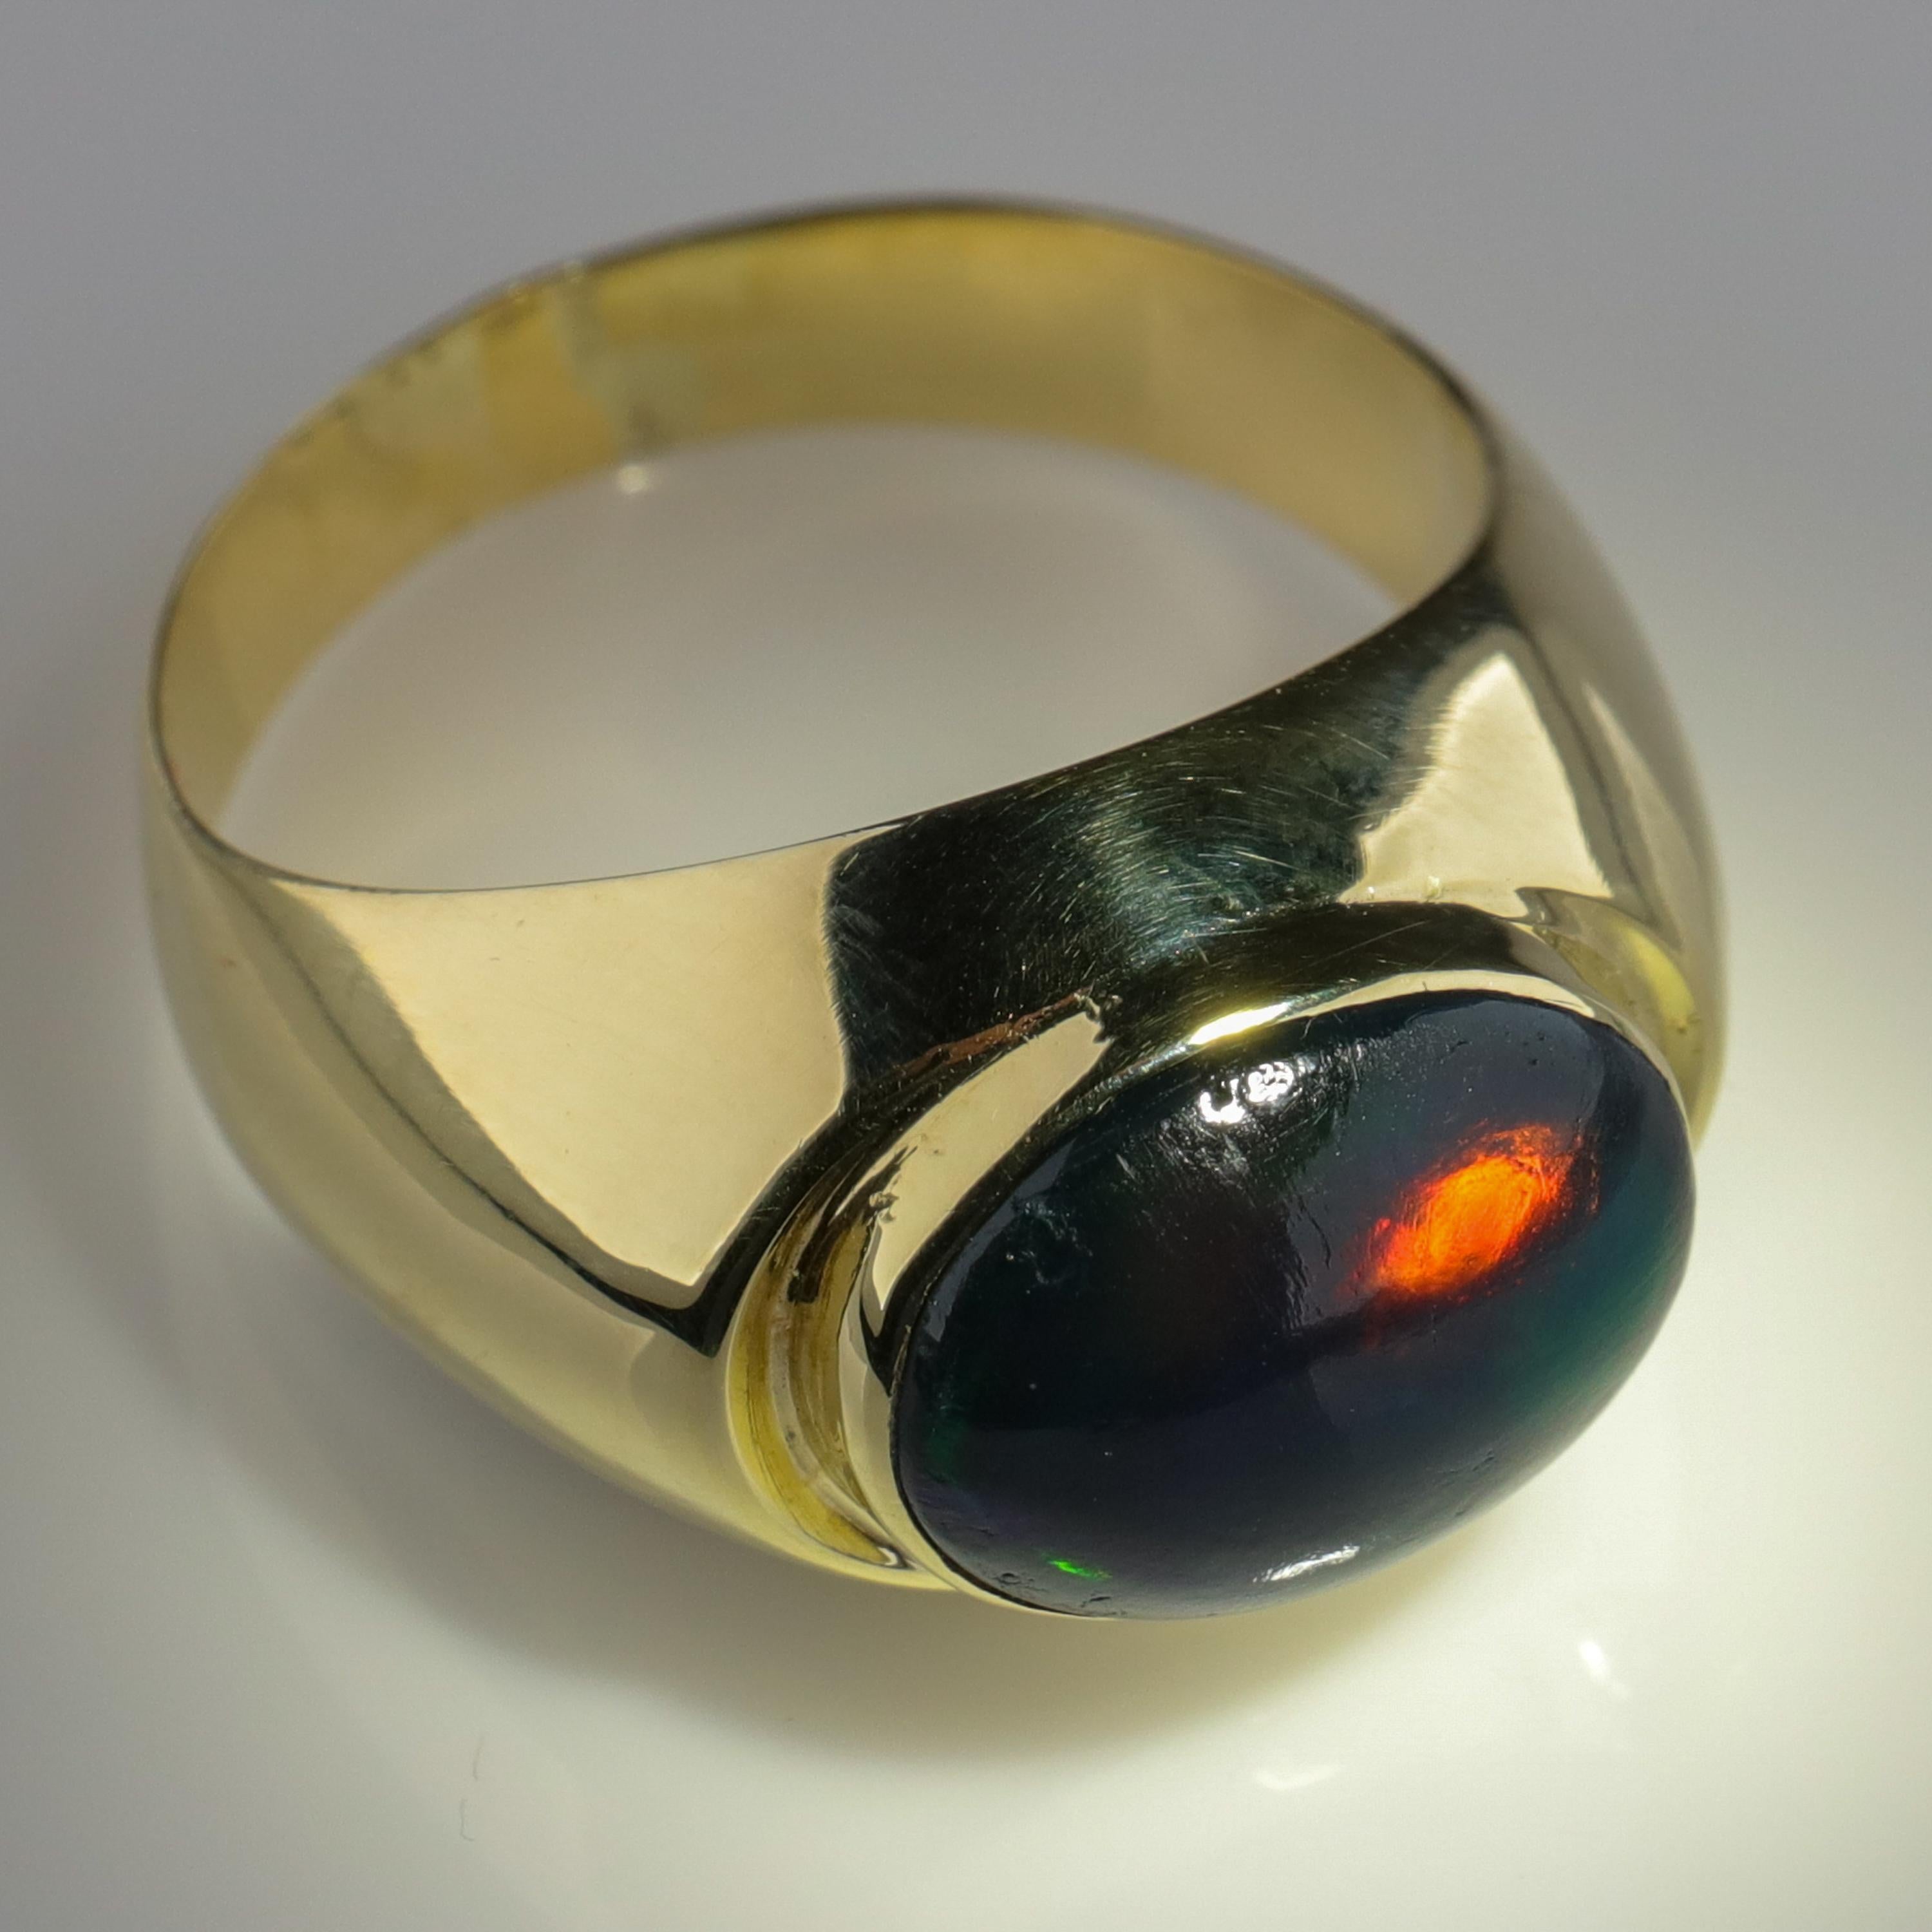 Black Opal Ring from Lightning Ridge is Understated Until It's Not 2